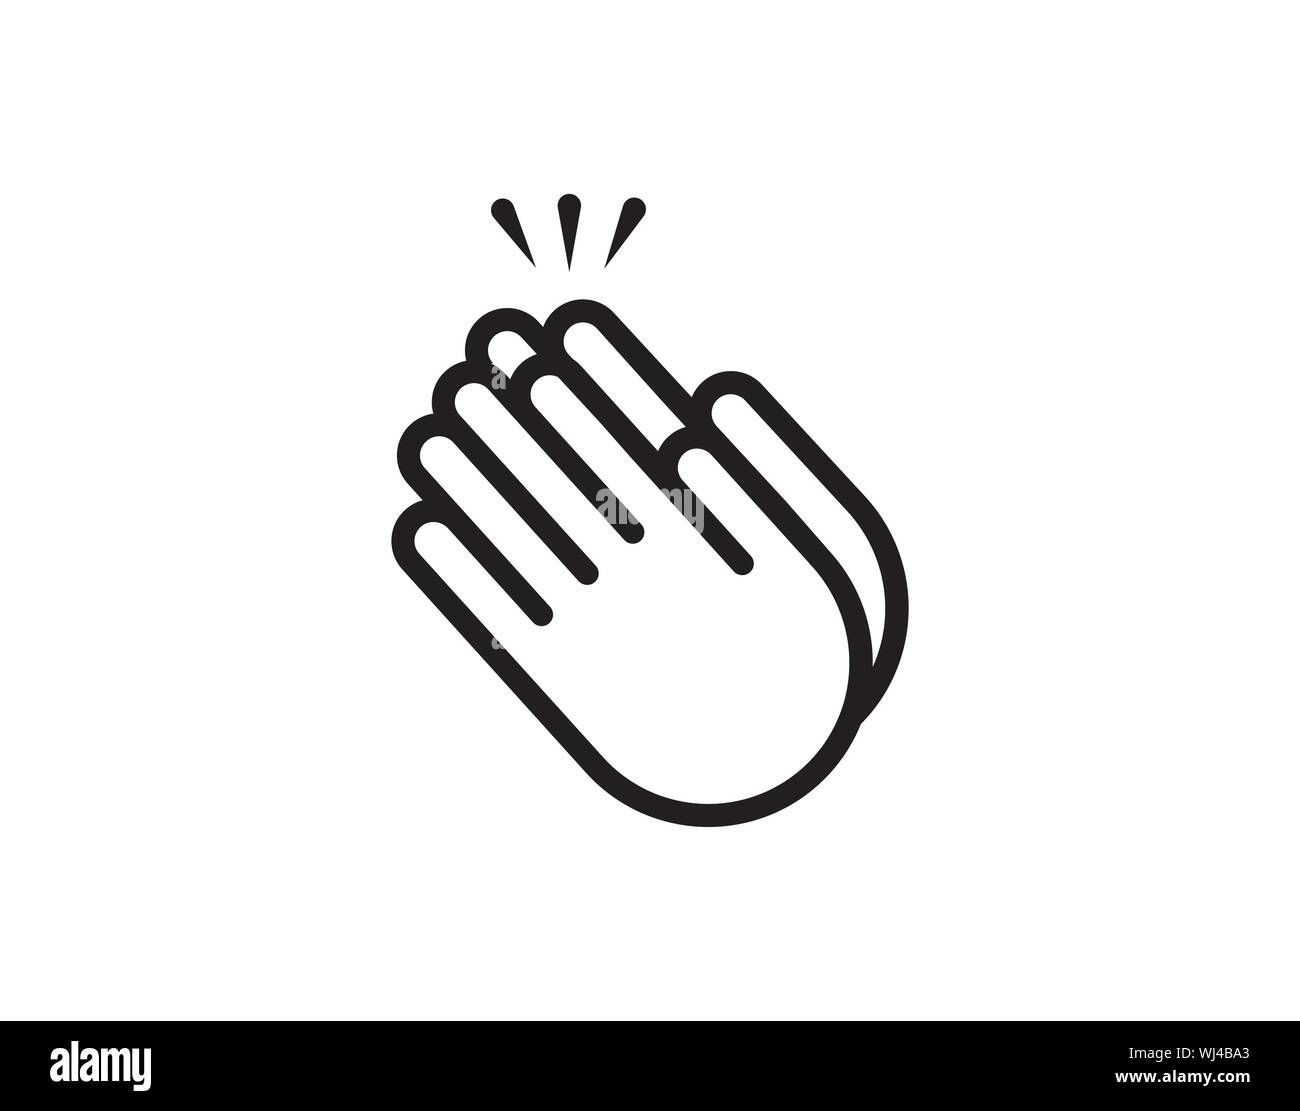 Applause icon clapping hands vector image Stock Vector